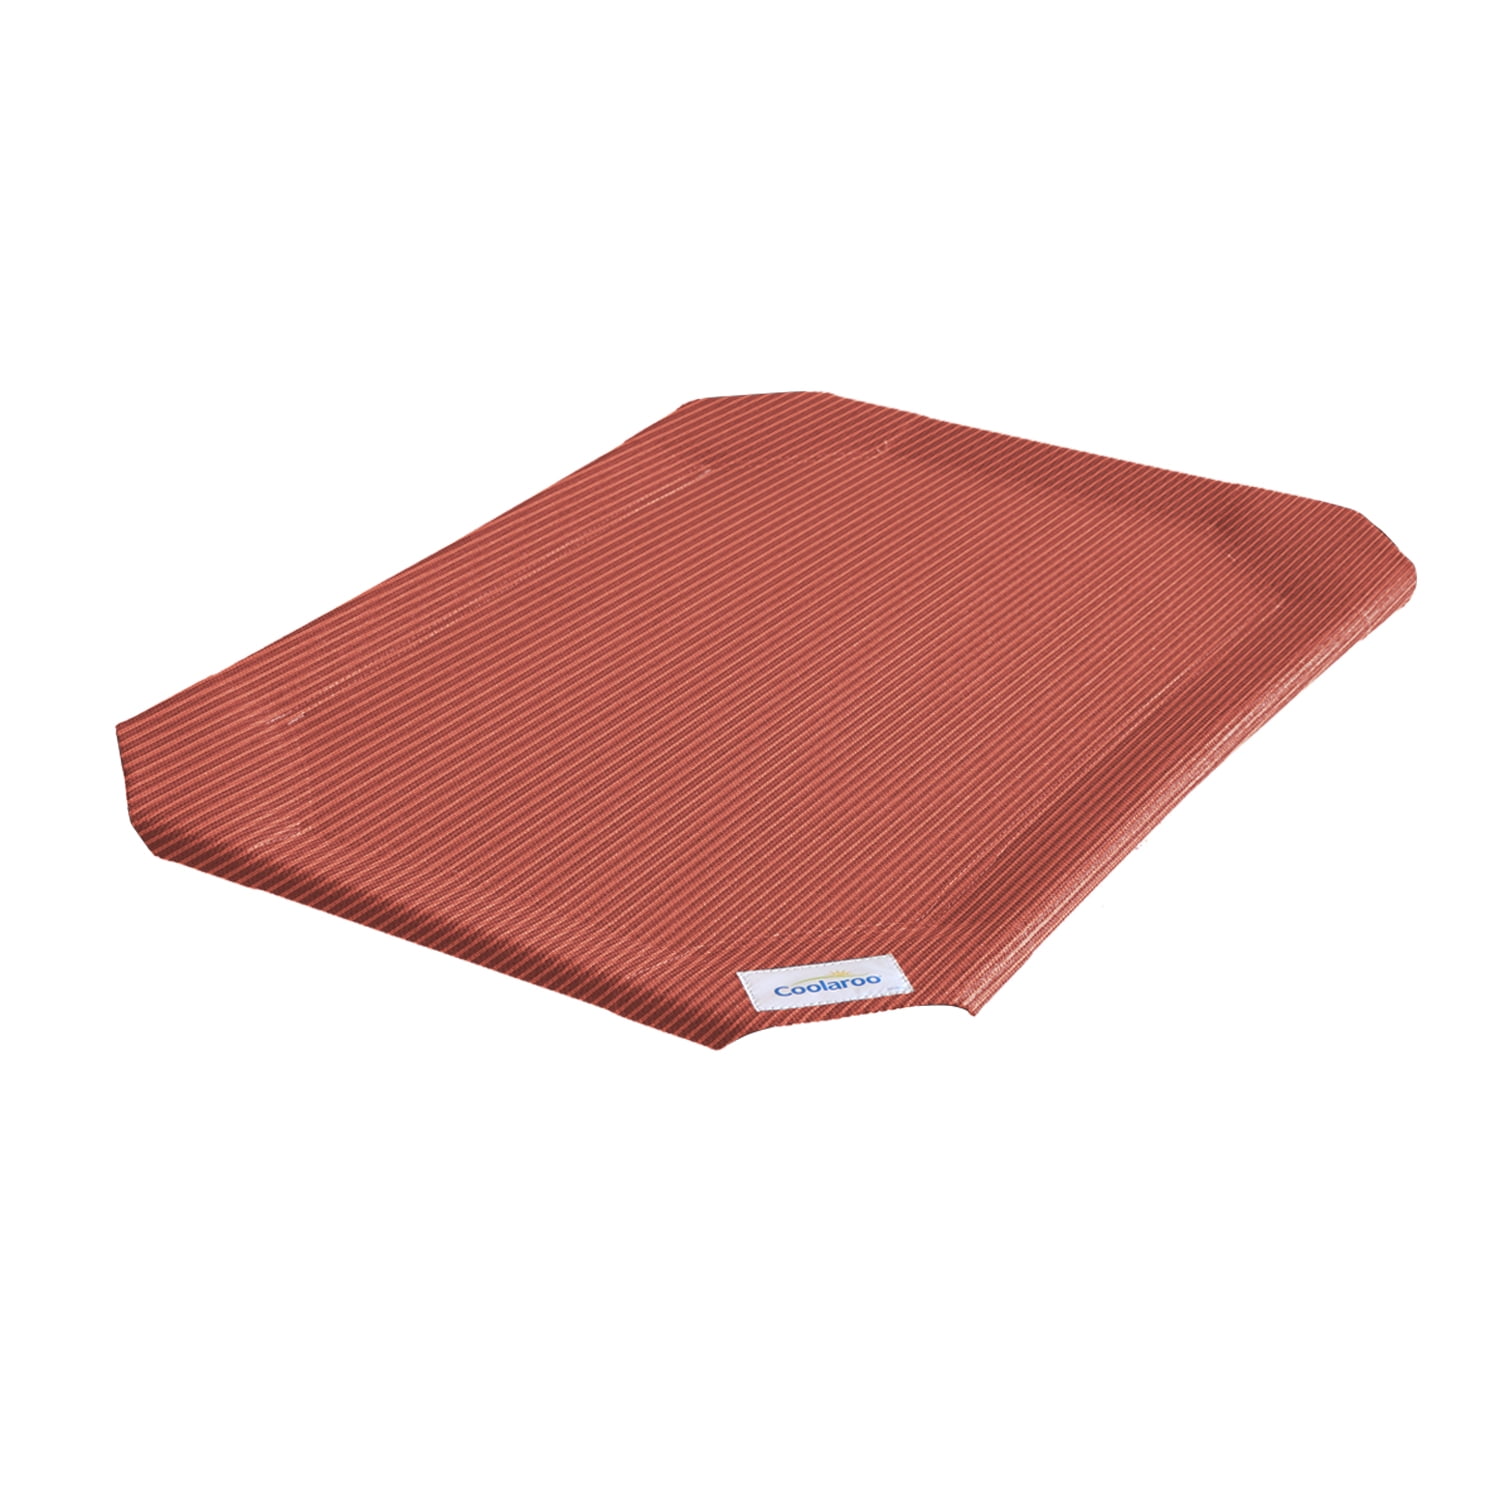 Replacement Cover Large Terracotta